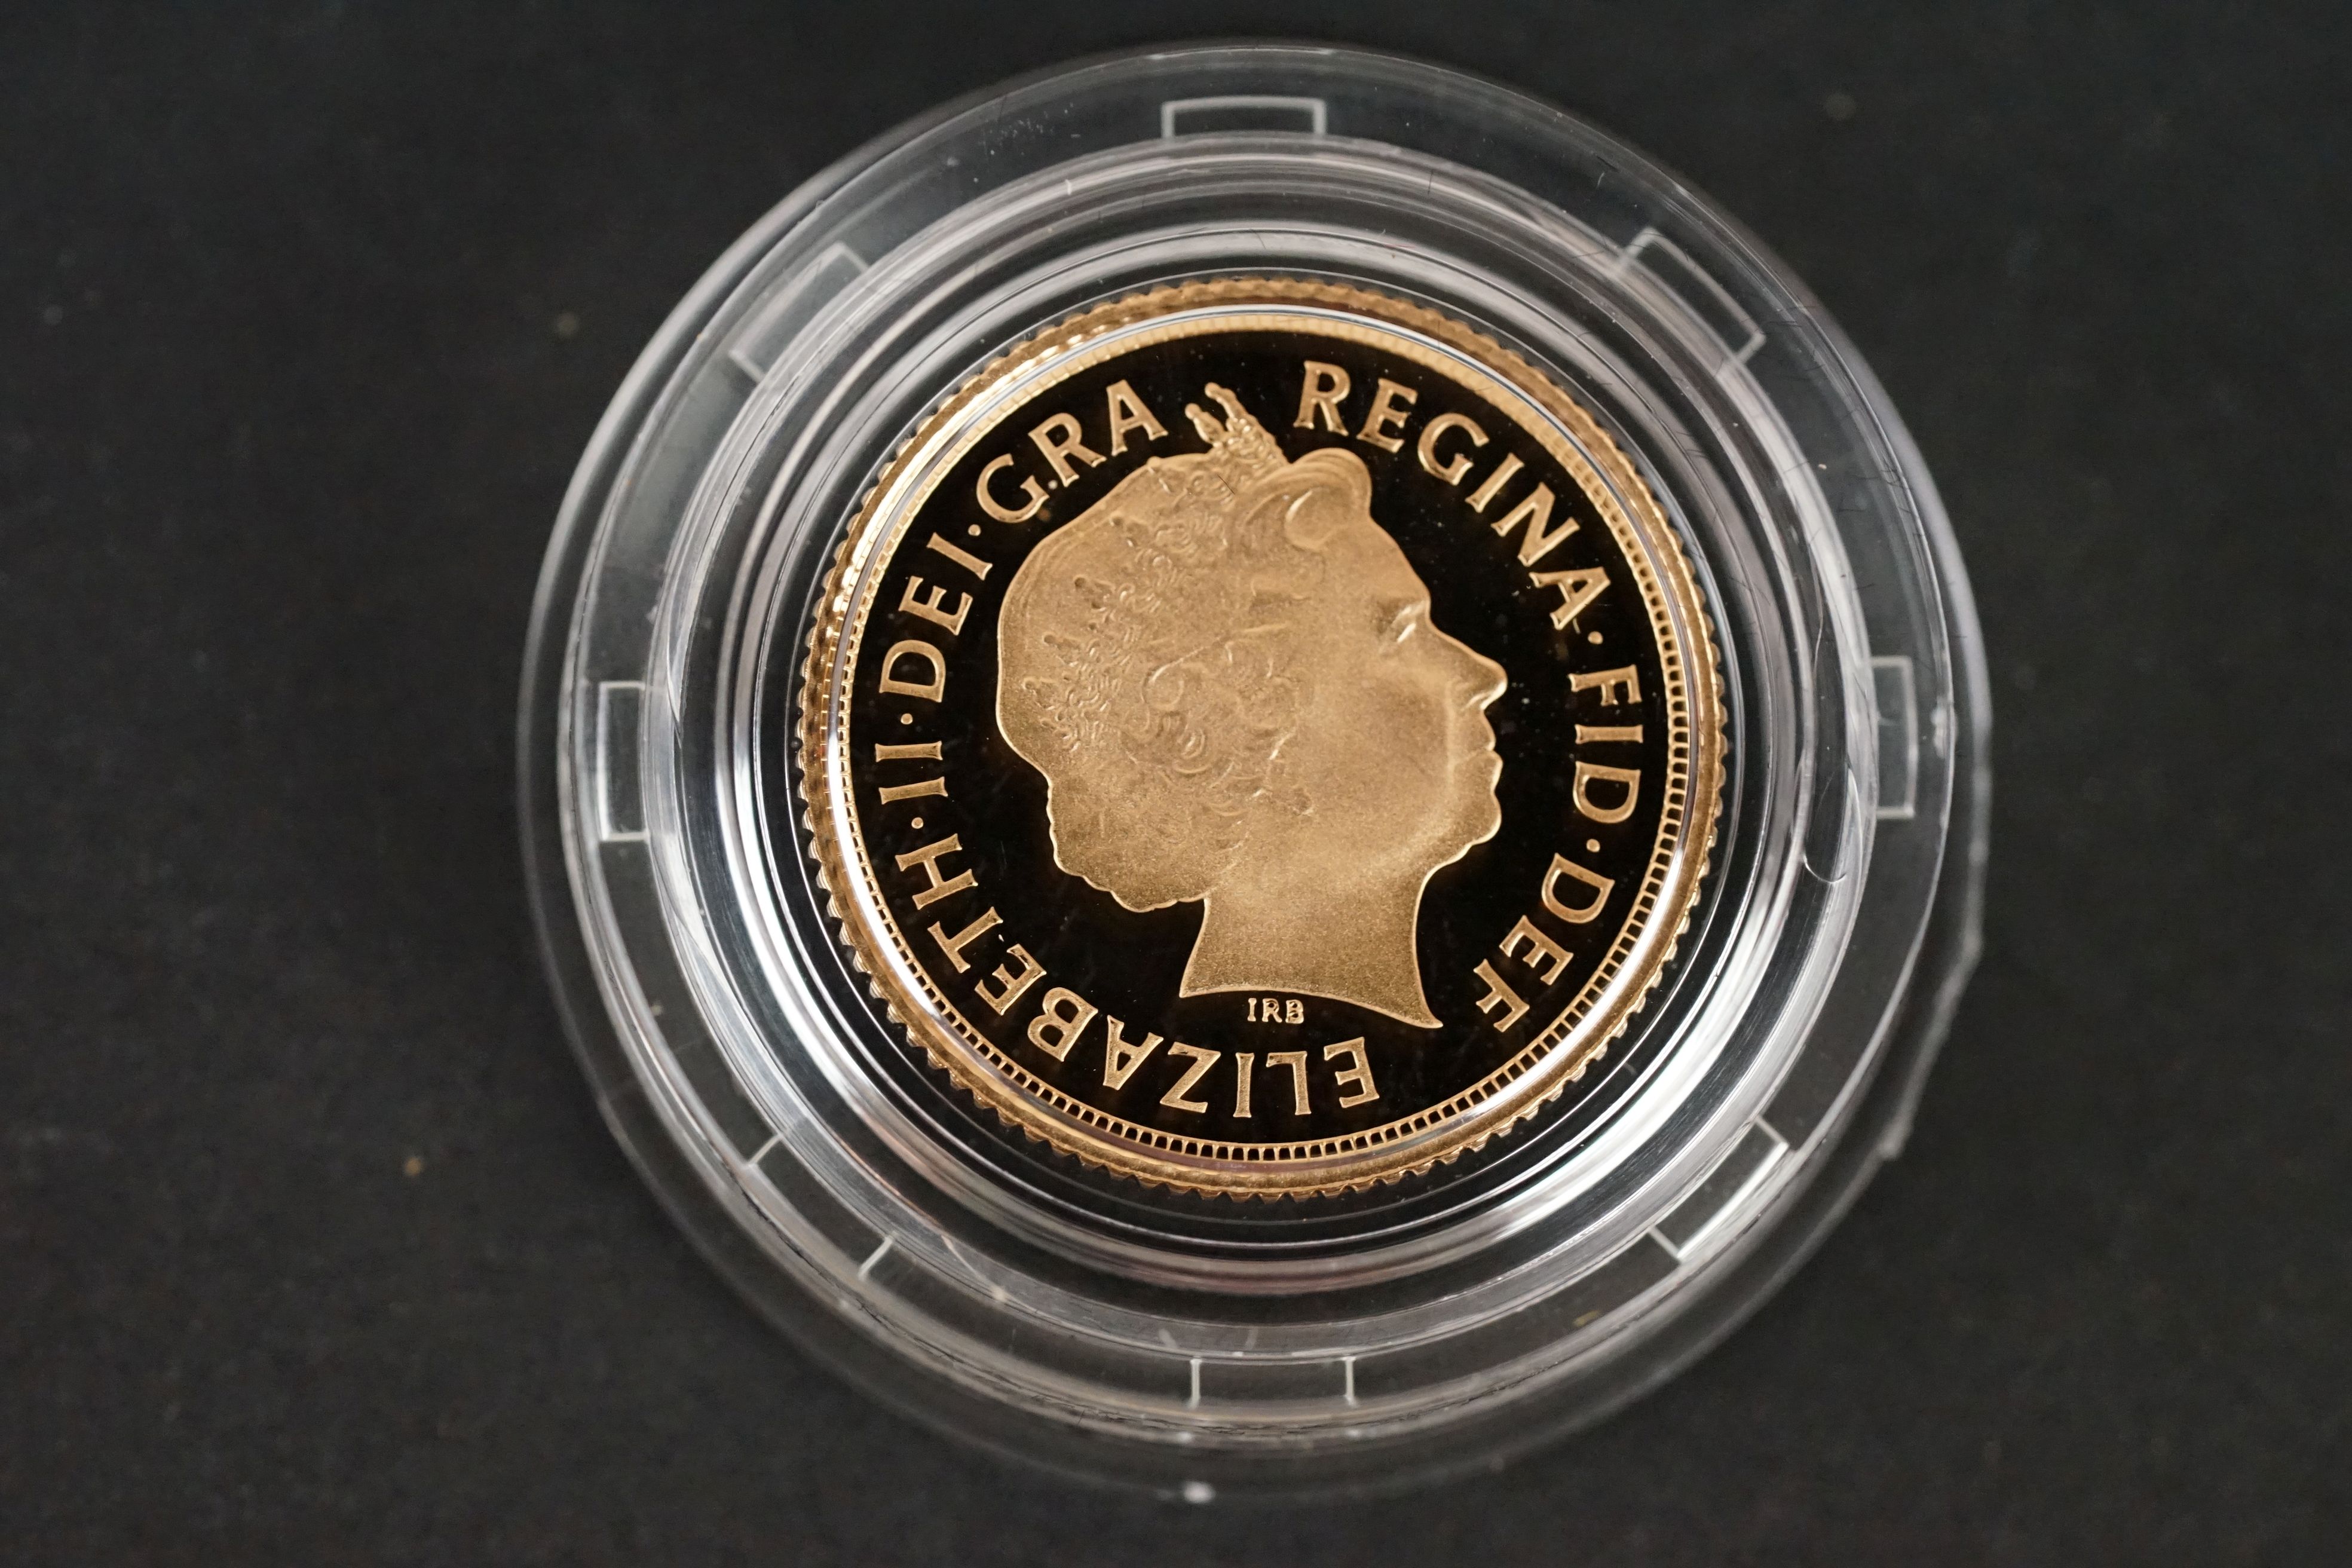 A Royal Mint 2012 UK Gold proof half sovereign coin complete with COA and presentation box. - Image 3 of 3